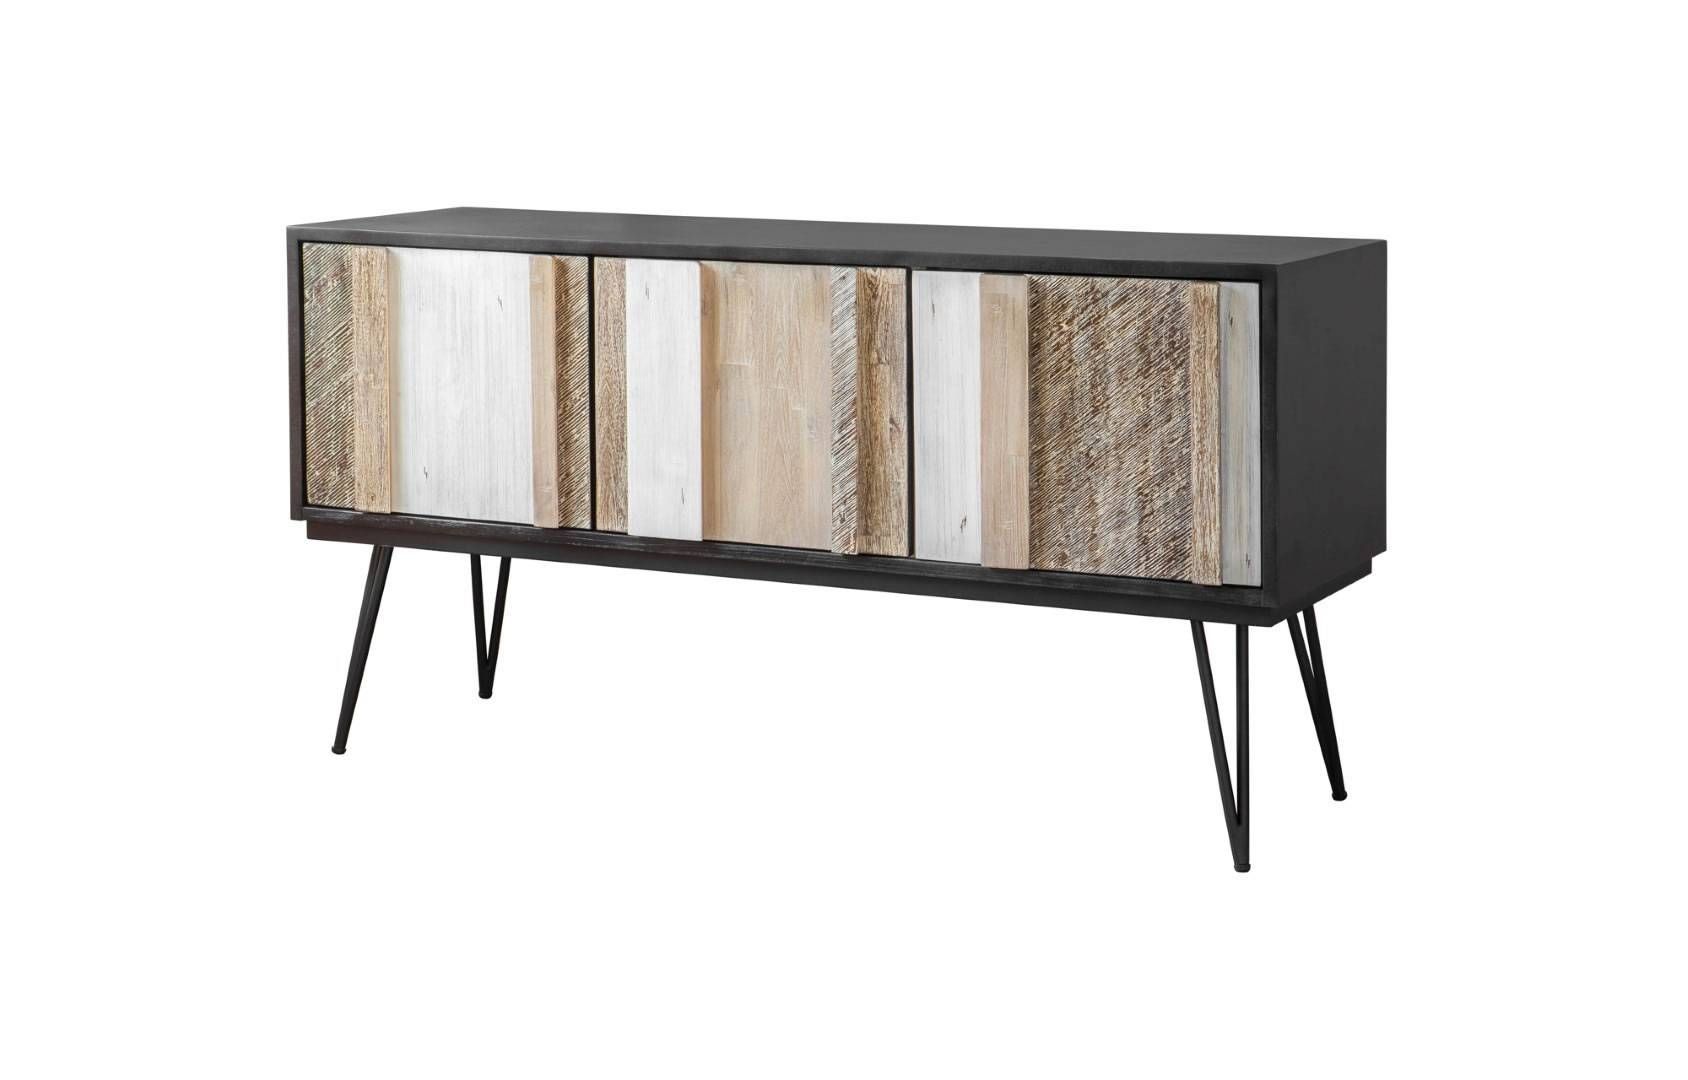 Eclectic – Lh Imports Noir Havana Sideboard – Lh Nha003b | Modern Intended For Eclectic Sideboards (View 10 of 15)